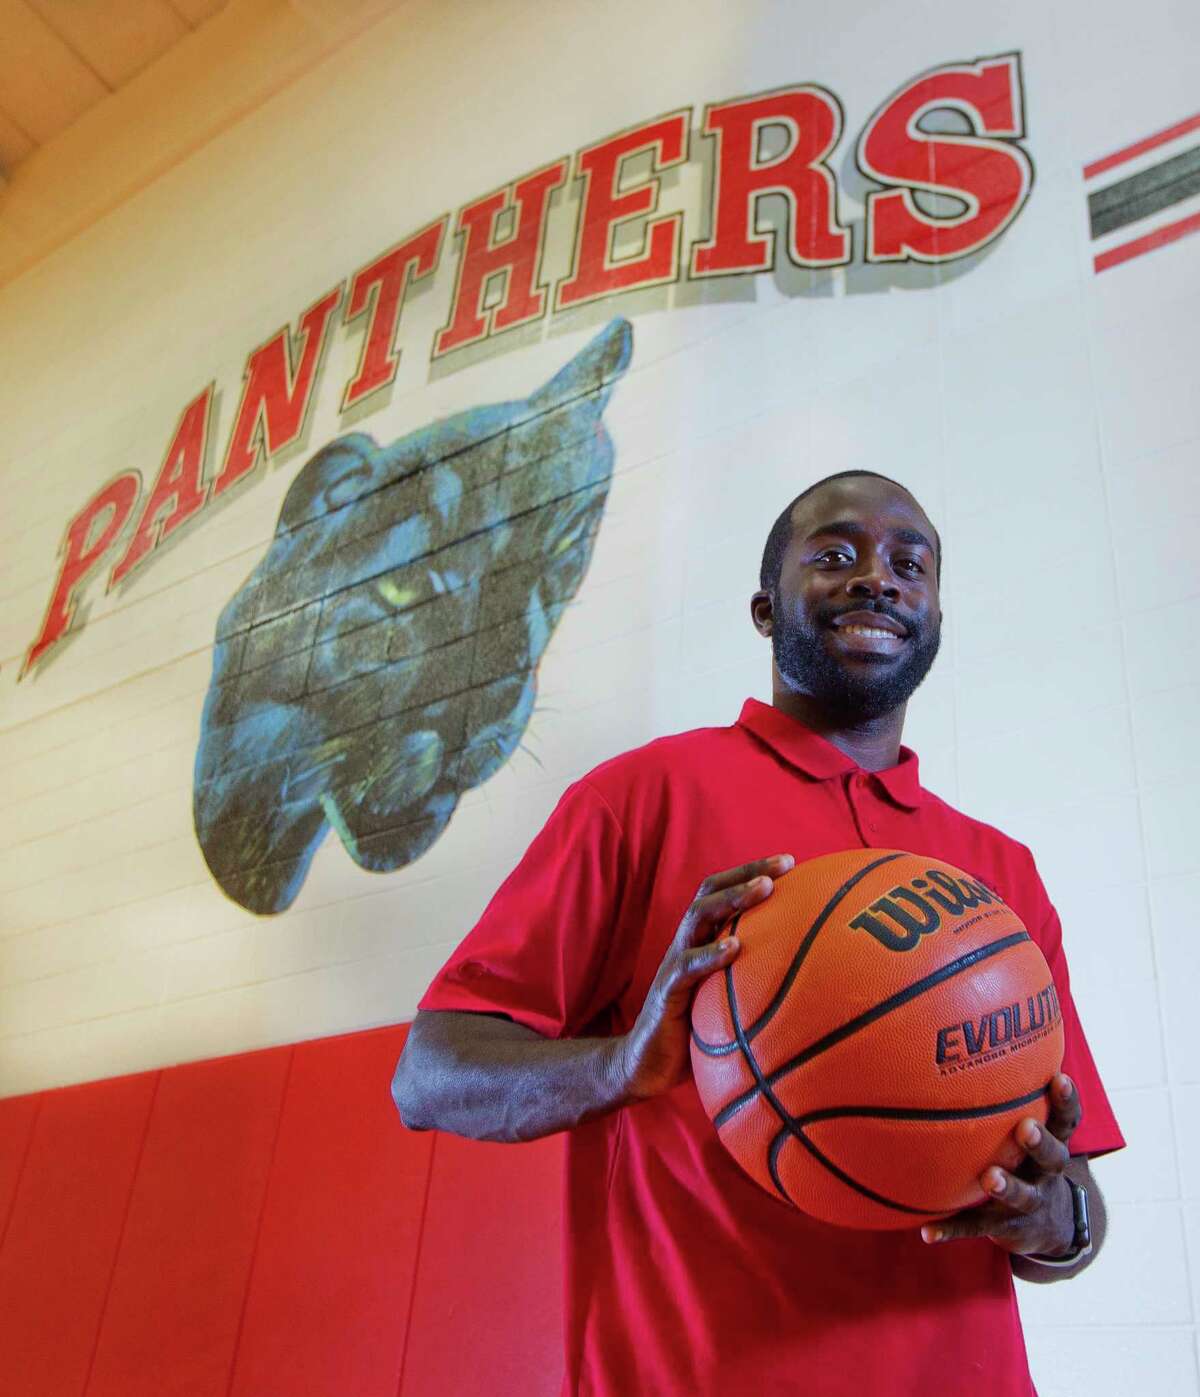 Caney Creek head basketball coach Randy Appiah is seen at Caney Creek High School, Wednesday, June 28, 2017, in Conroe.